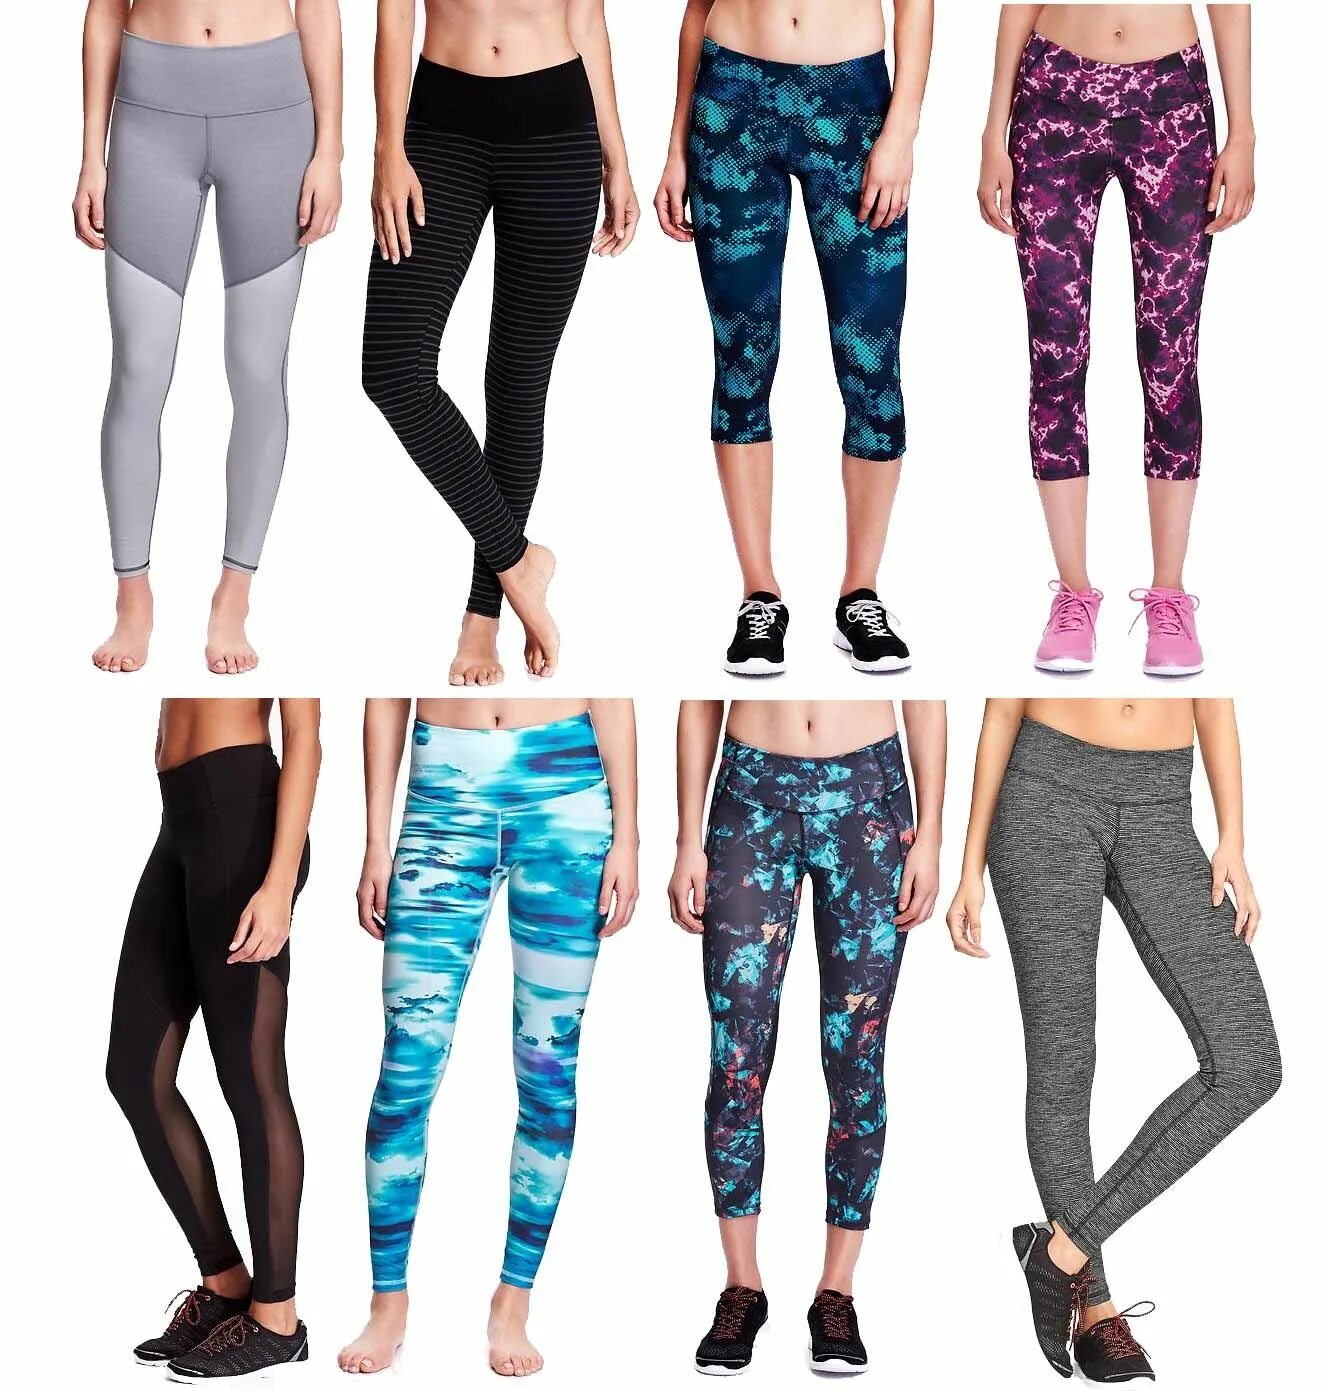 Go-Dry одежда. Old Navy Active. Compression outfit. High Waisted Yoga Pants for boys. Wear pants